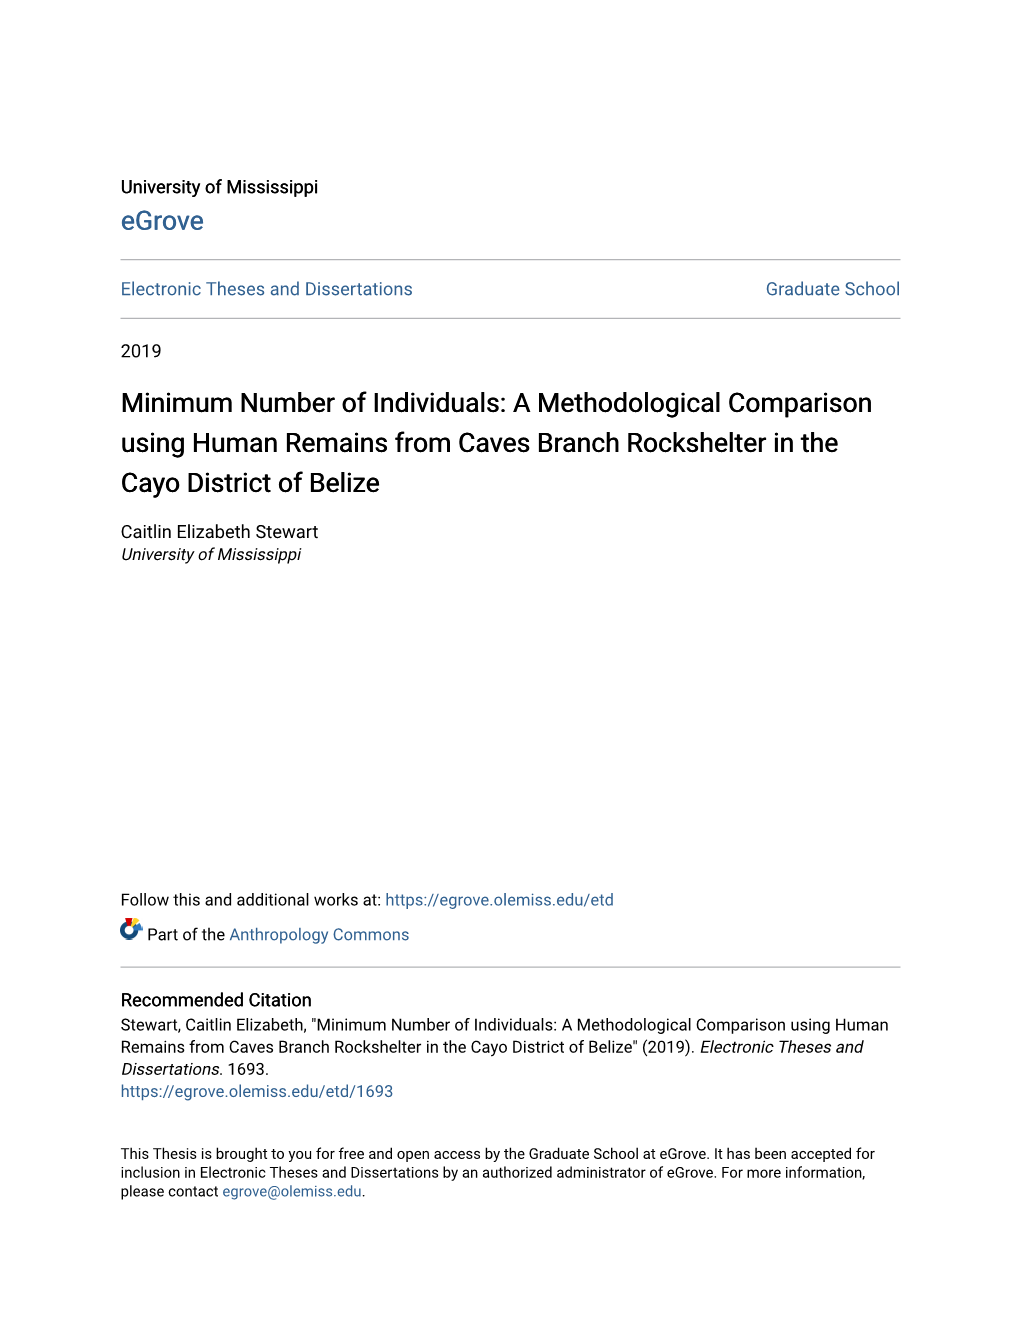 Minimum Number of Individuals: a Methodological Comparison Using Human Remains from Caves Branch Rockshelter in the Cayo District of Belize